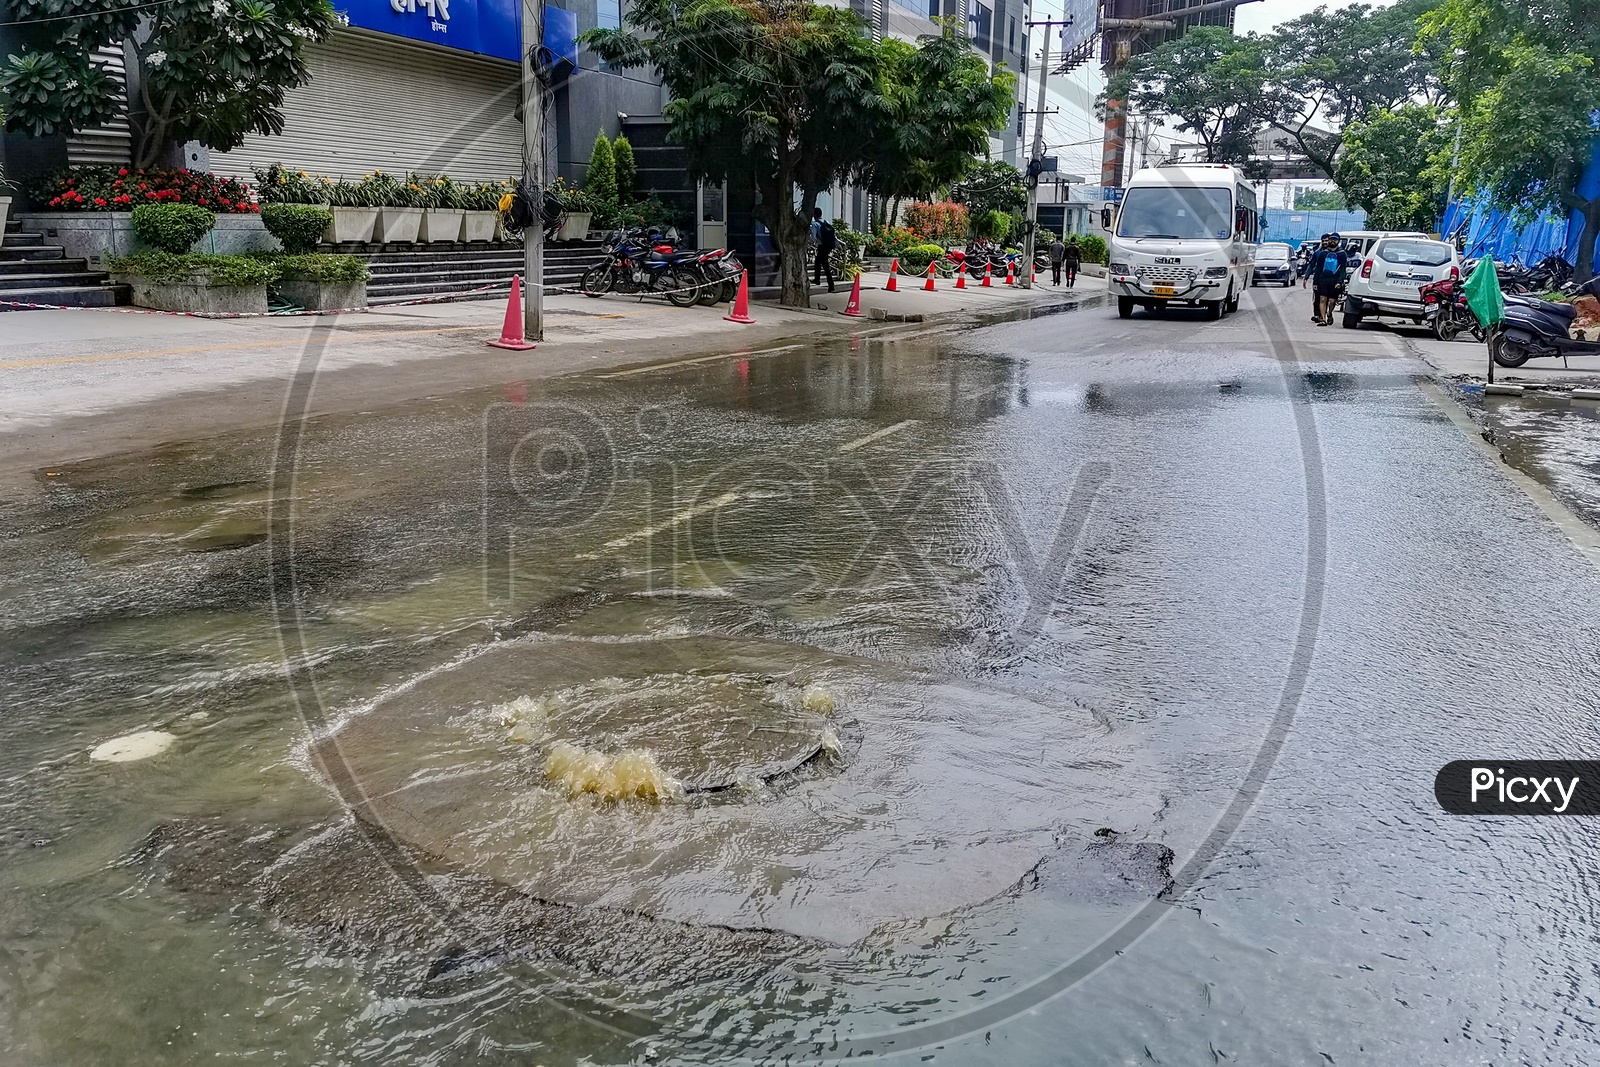 GHMC HMWS Manholes Overflowing with Drainage Or Sewage Water Due To Heavy Rains on Hyderabad Roads